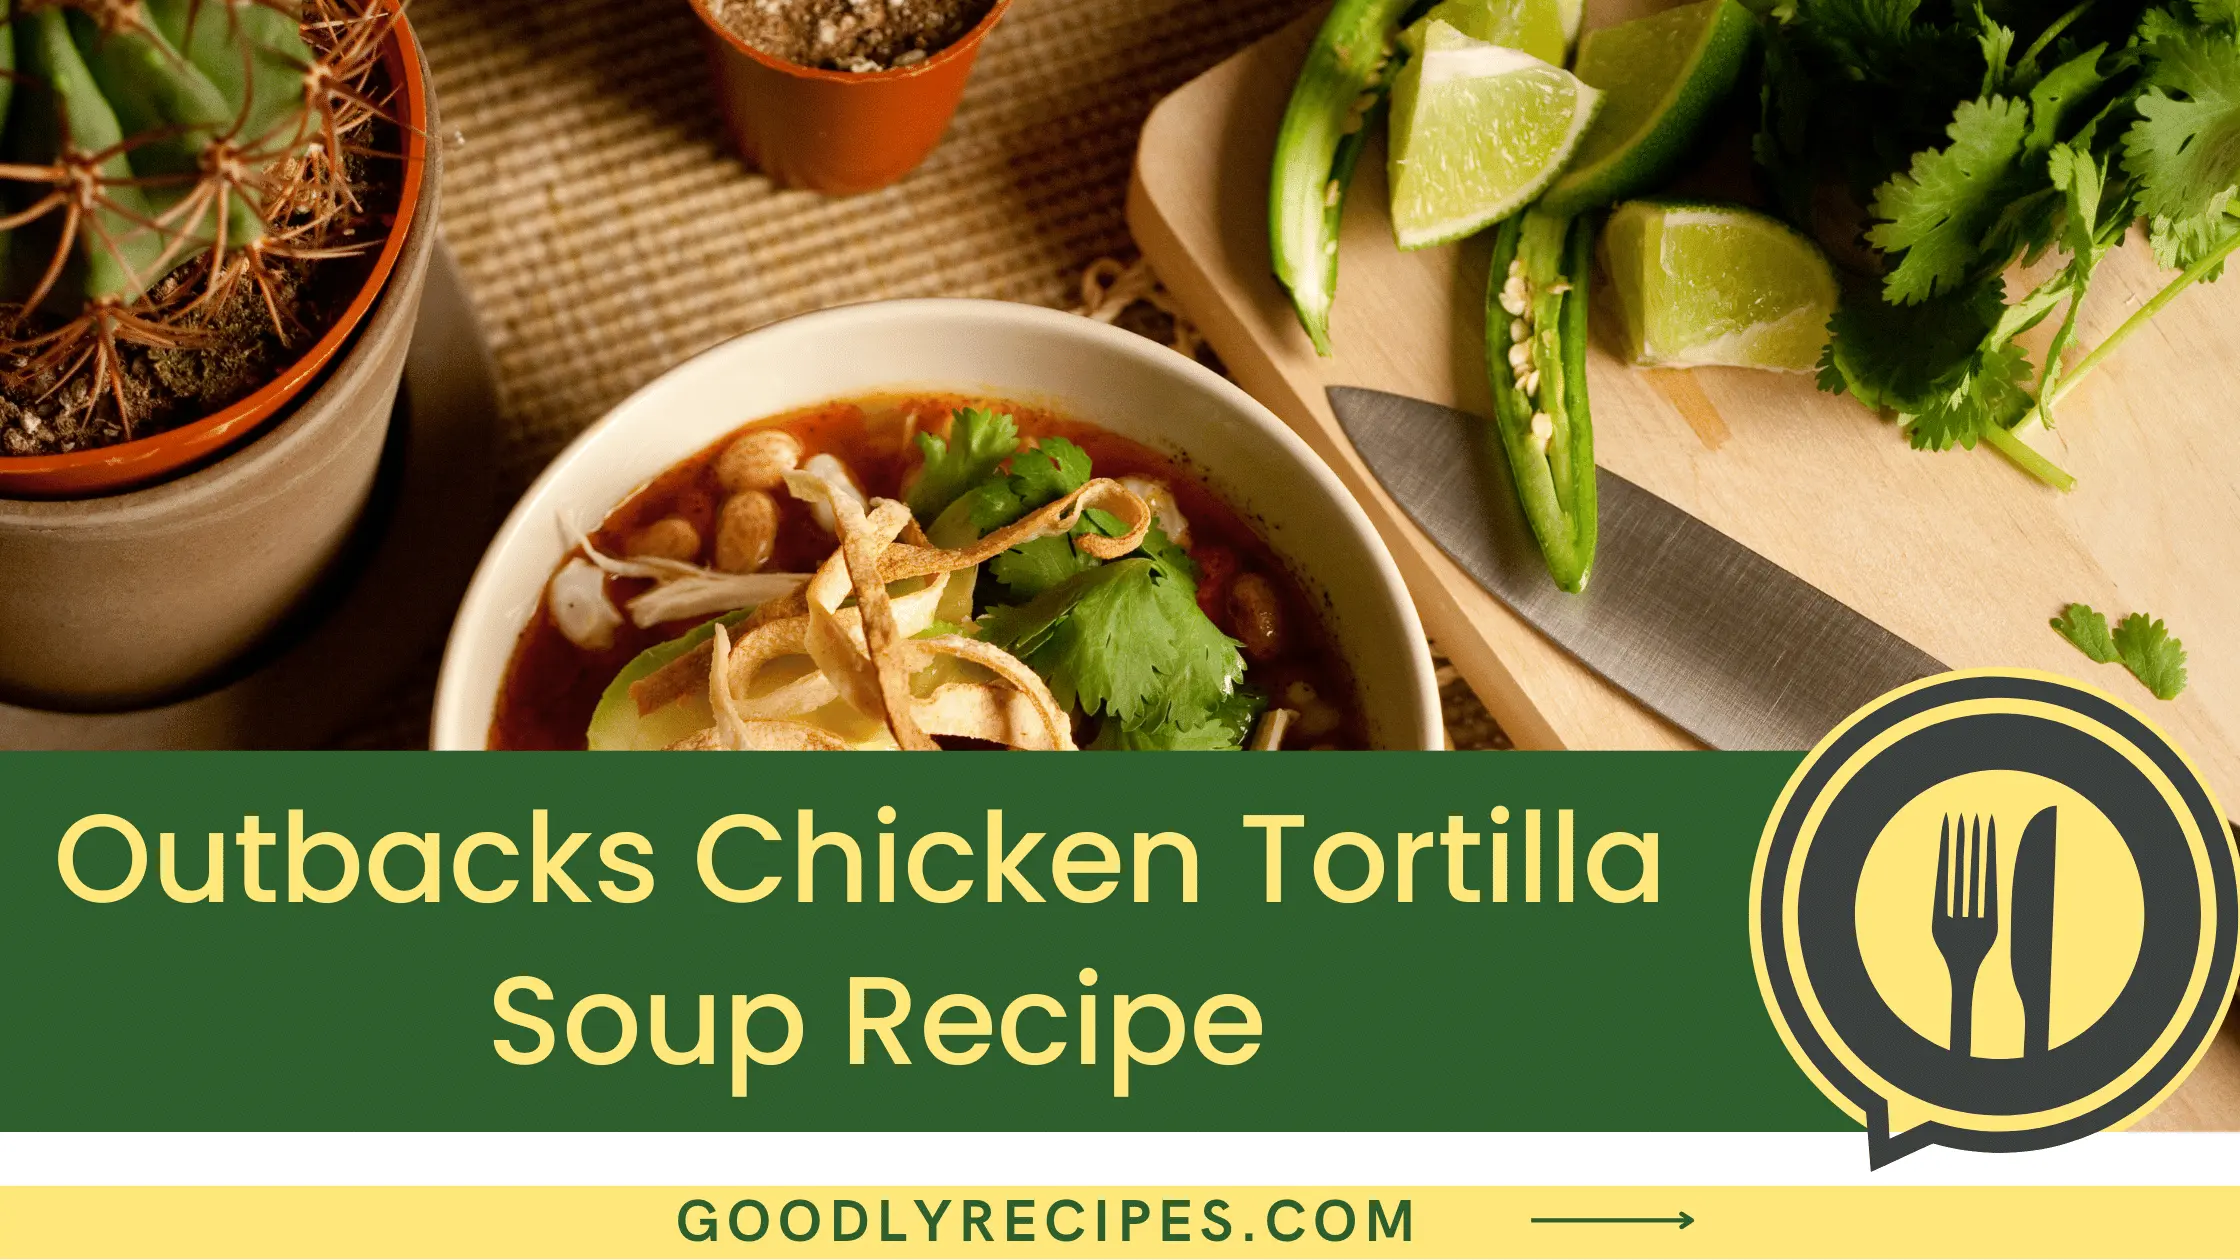 What is Outbacks Chicken Tortilla Soup?